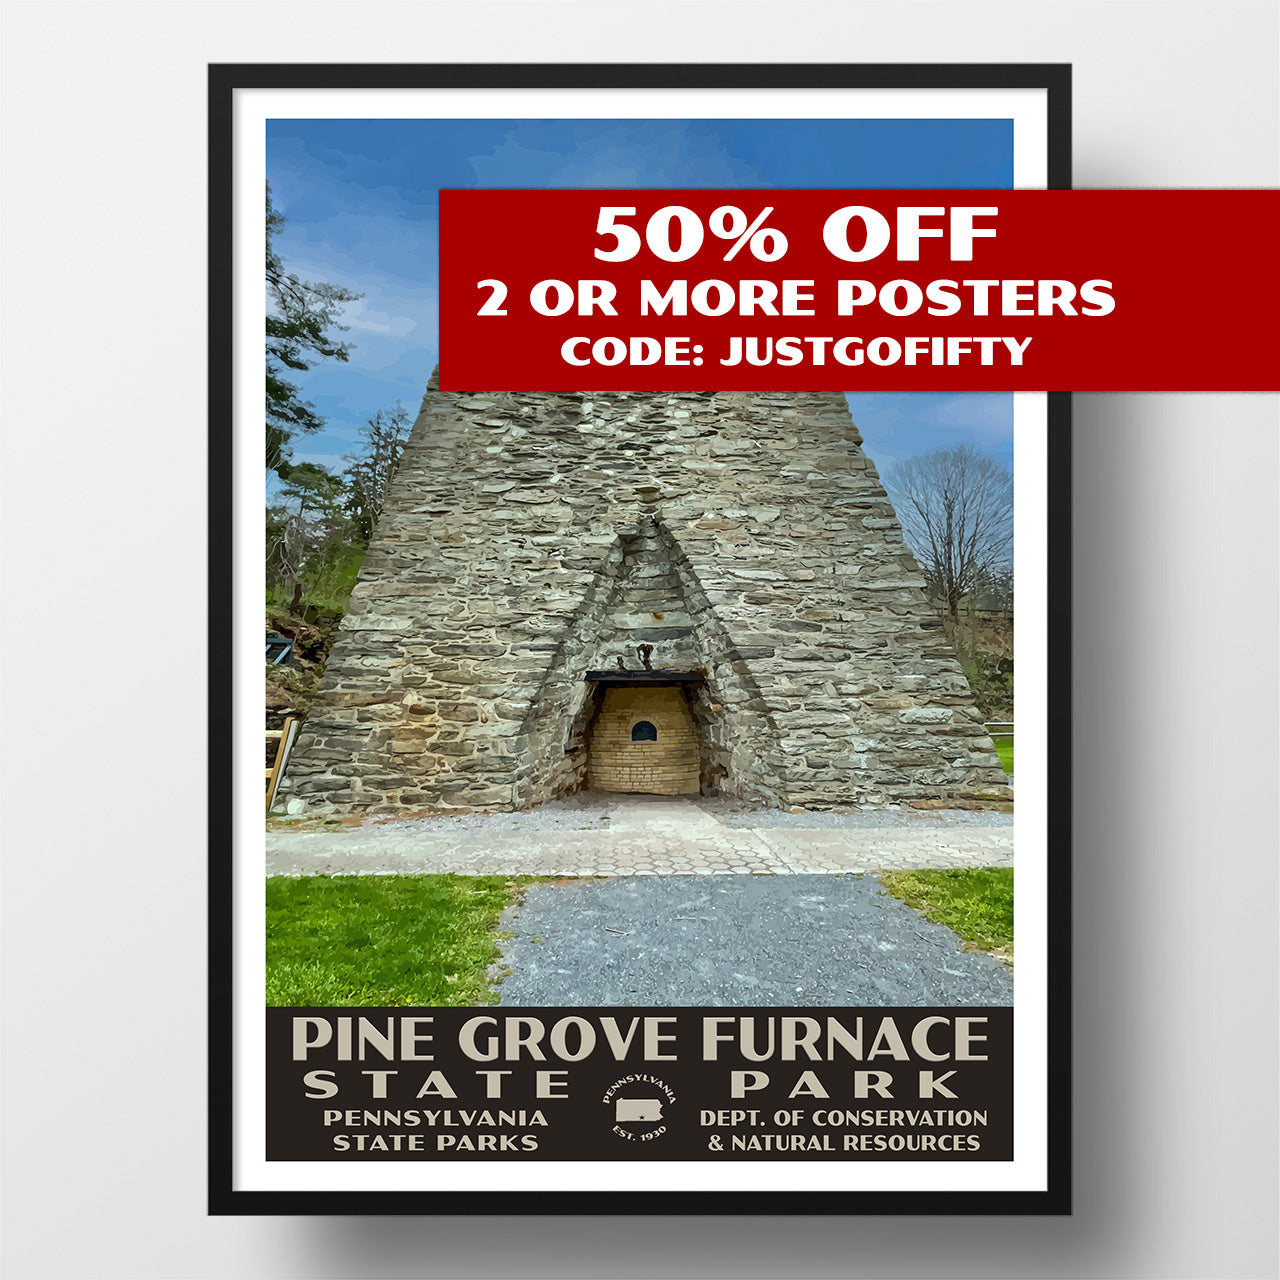 Pine Grove Furnace State Park Poster 